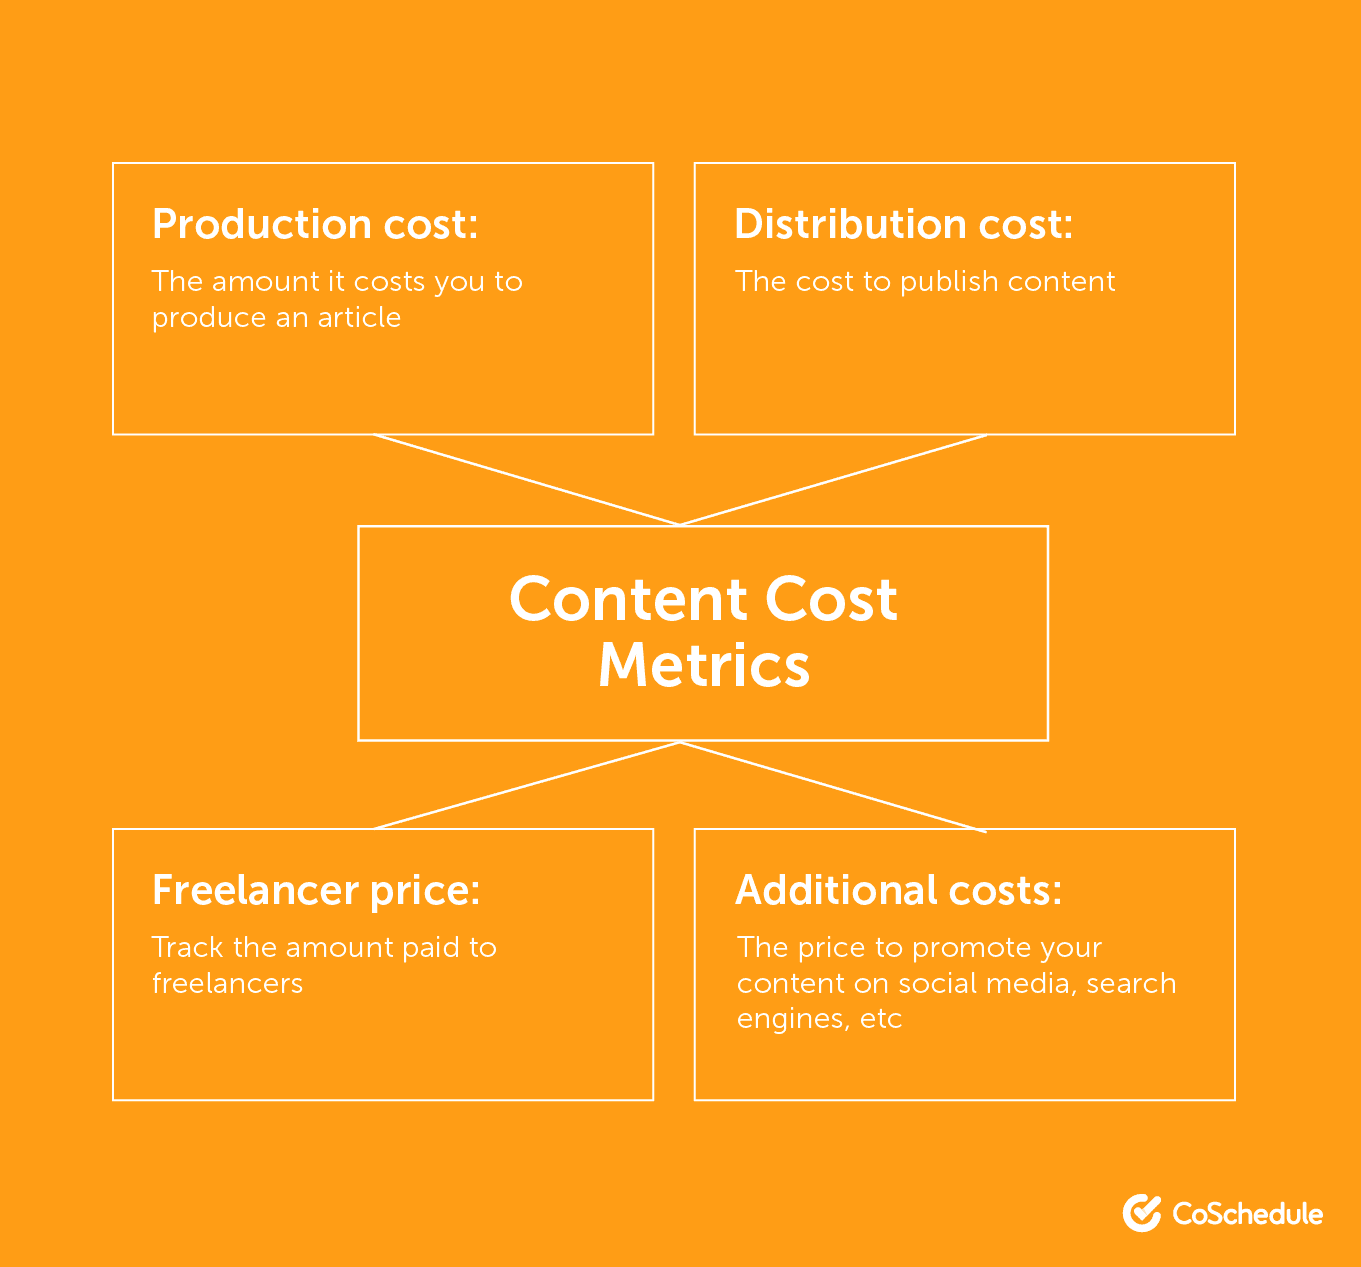 Content Cost Metrics include, Production cost, distribution cost, freelancer price, additional costs